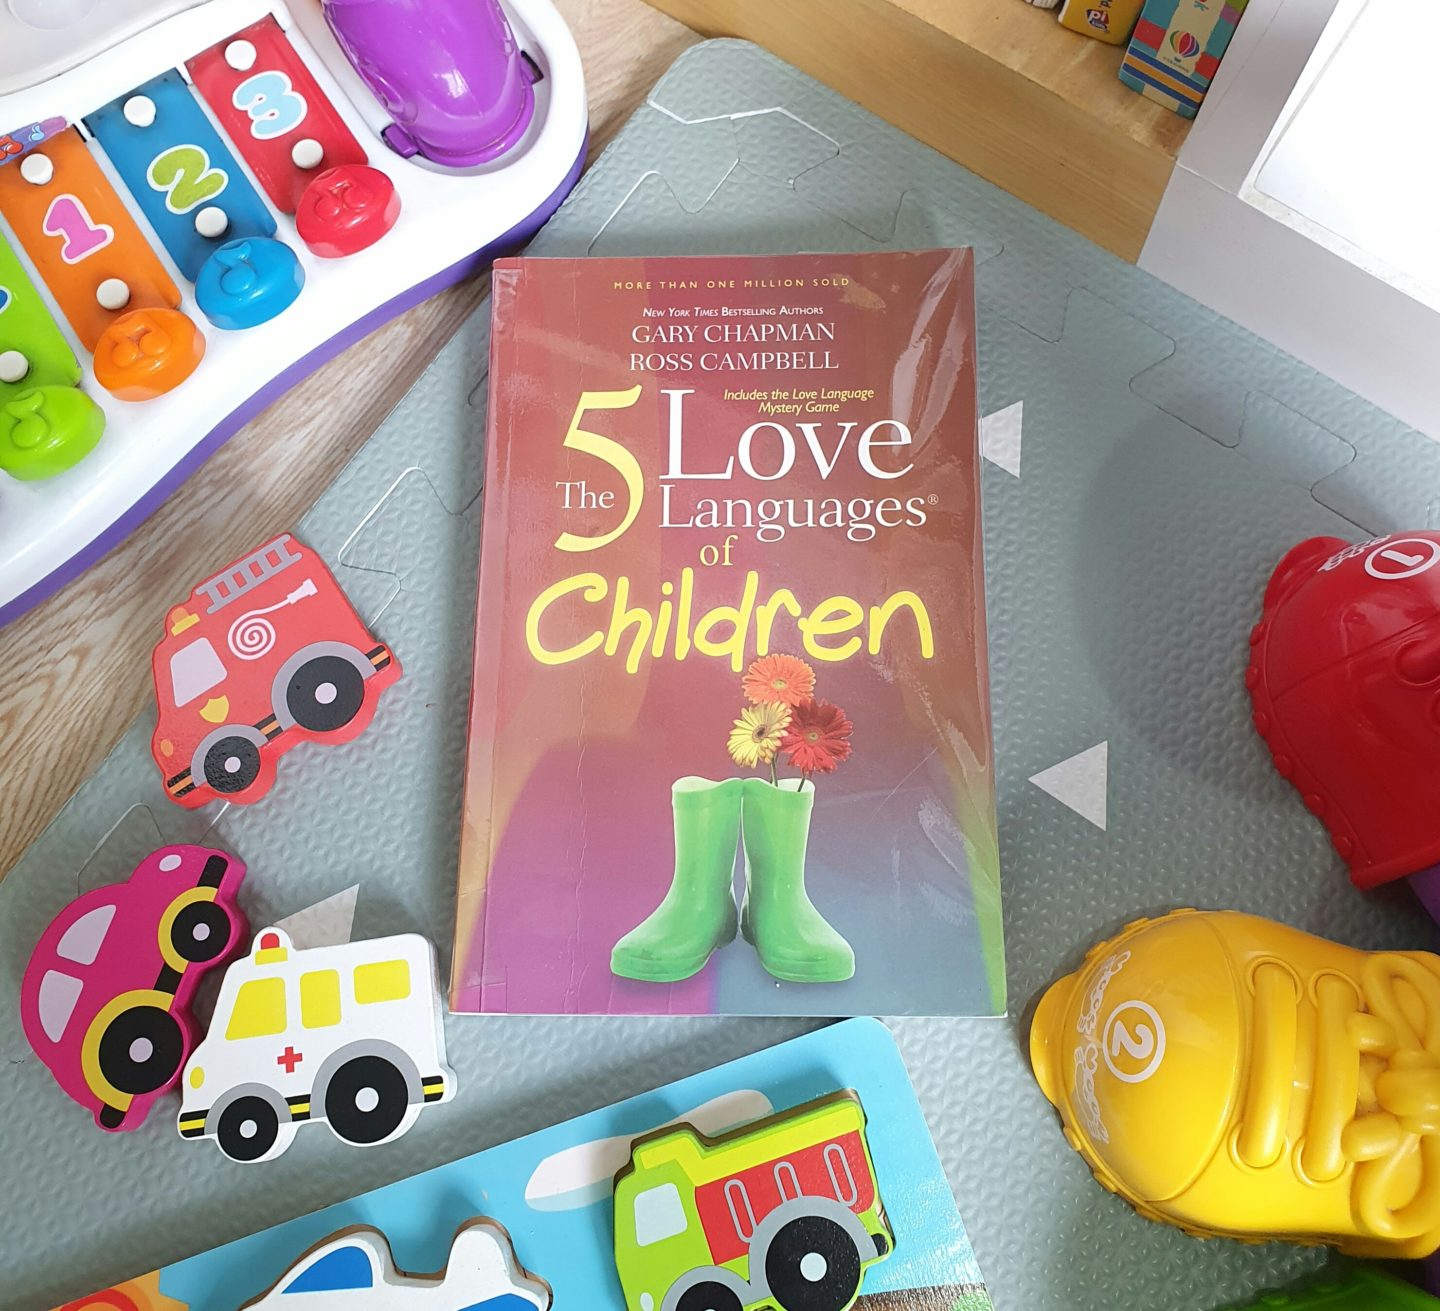 On My Reading List:  The 5 Love Languages Of Children